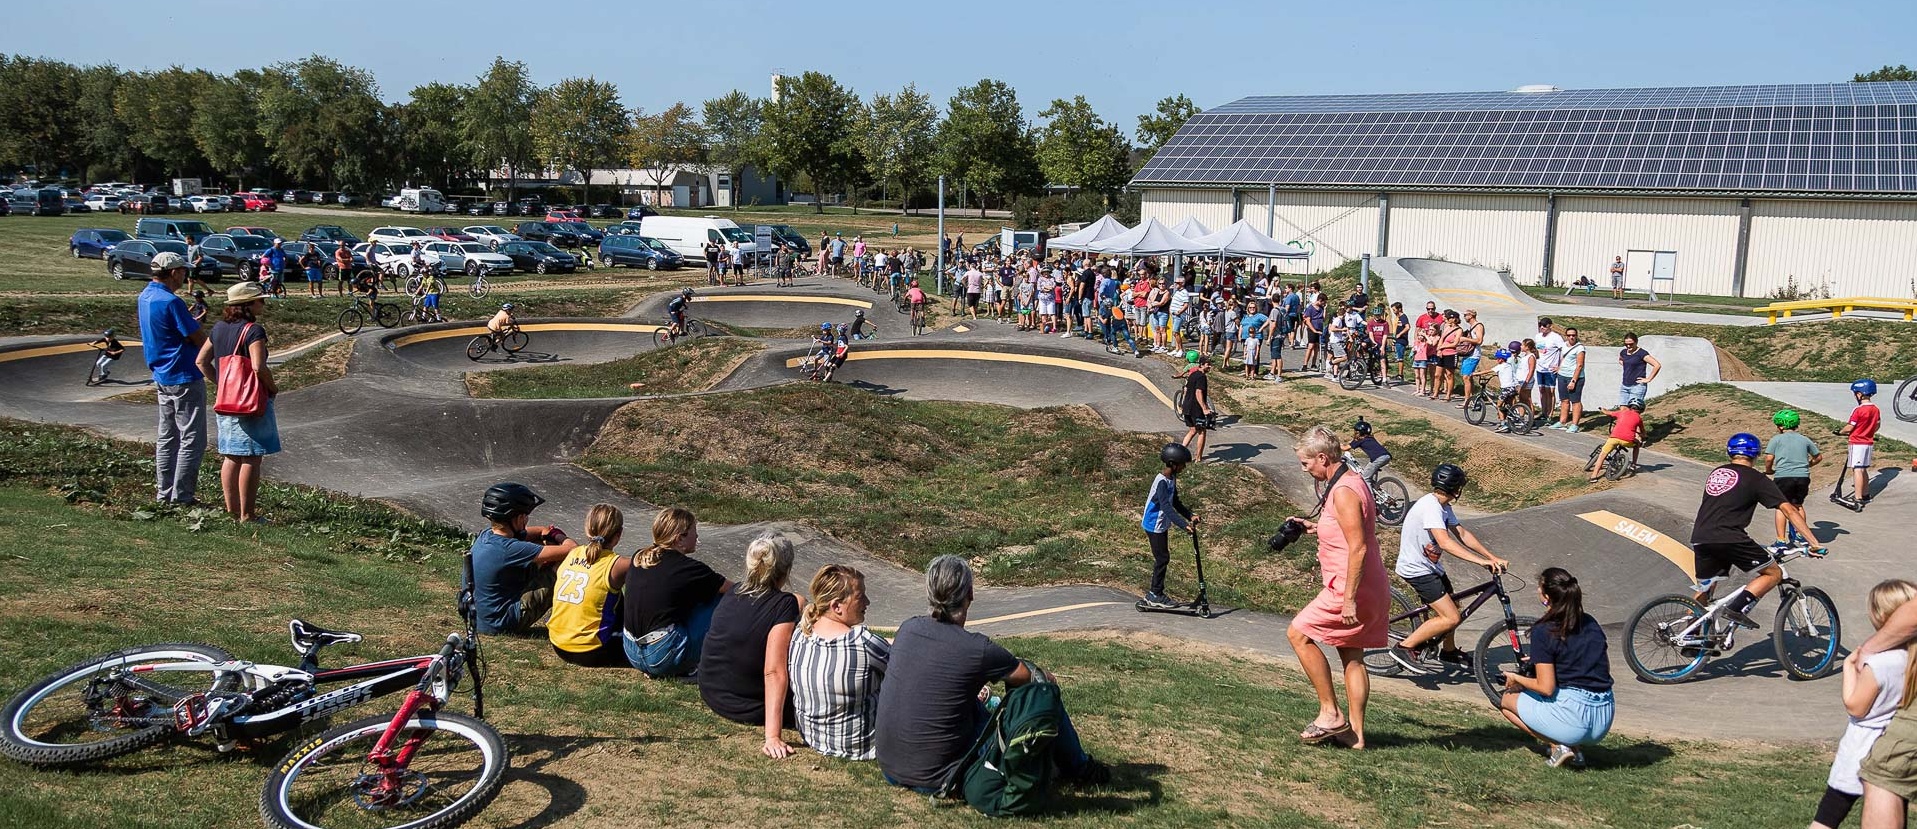 [Translate to Chinesisch:] Pump track with a large audience for the opening of the facility.